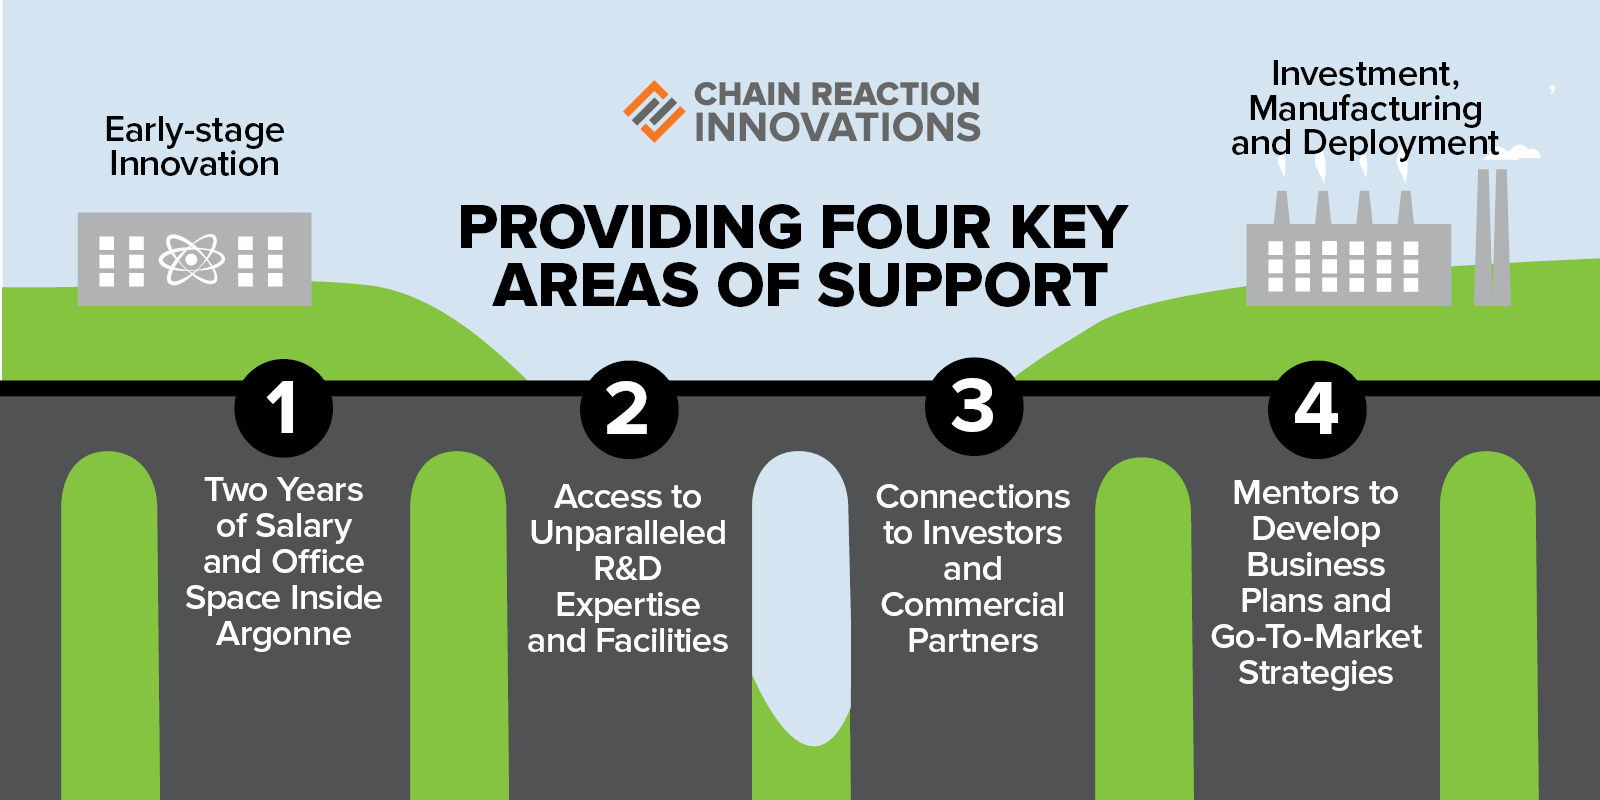 Providing four key areas of support: 1. Two years of salary and office space inside Argonne, 2. Access to Unparalleled R&D Expertise and Facilities, 3. Connections to investors and commercial partners, 4. Mentors to develop business plans and go-to-market strategies